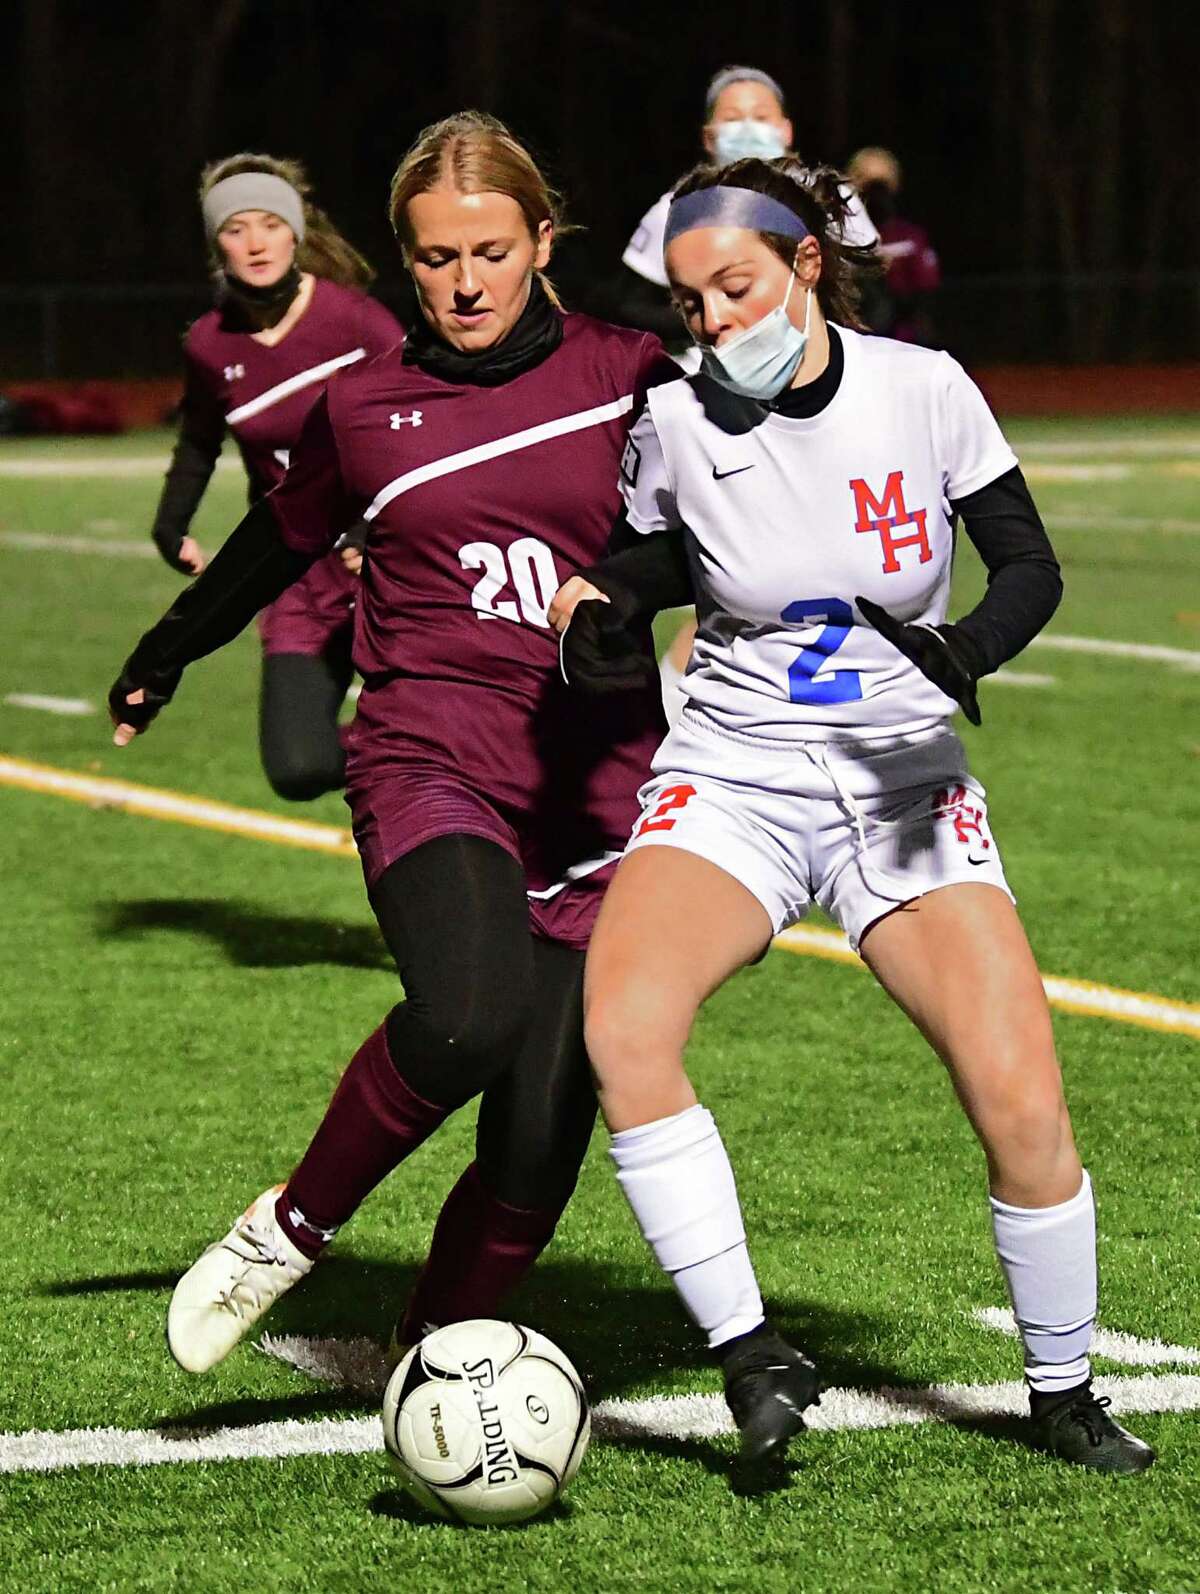 Greenville's Kaylee Burke, left, battles with Maple Hill's Isabella Thomas during the Patroon Conference girls' soccer title game on Monday, Nov. 2, 2020 in Craryville, N.Y. (Lori Van Buren/Times Union)